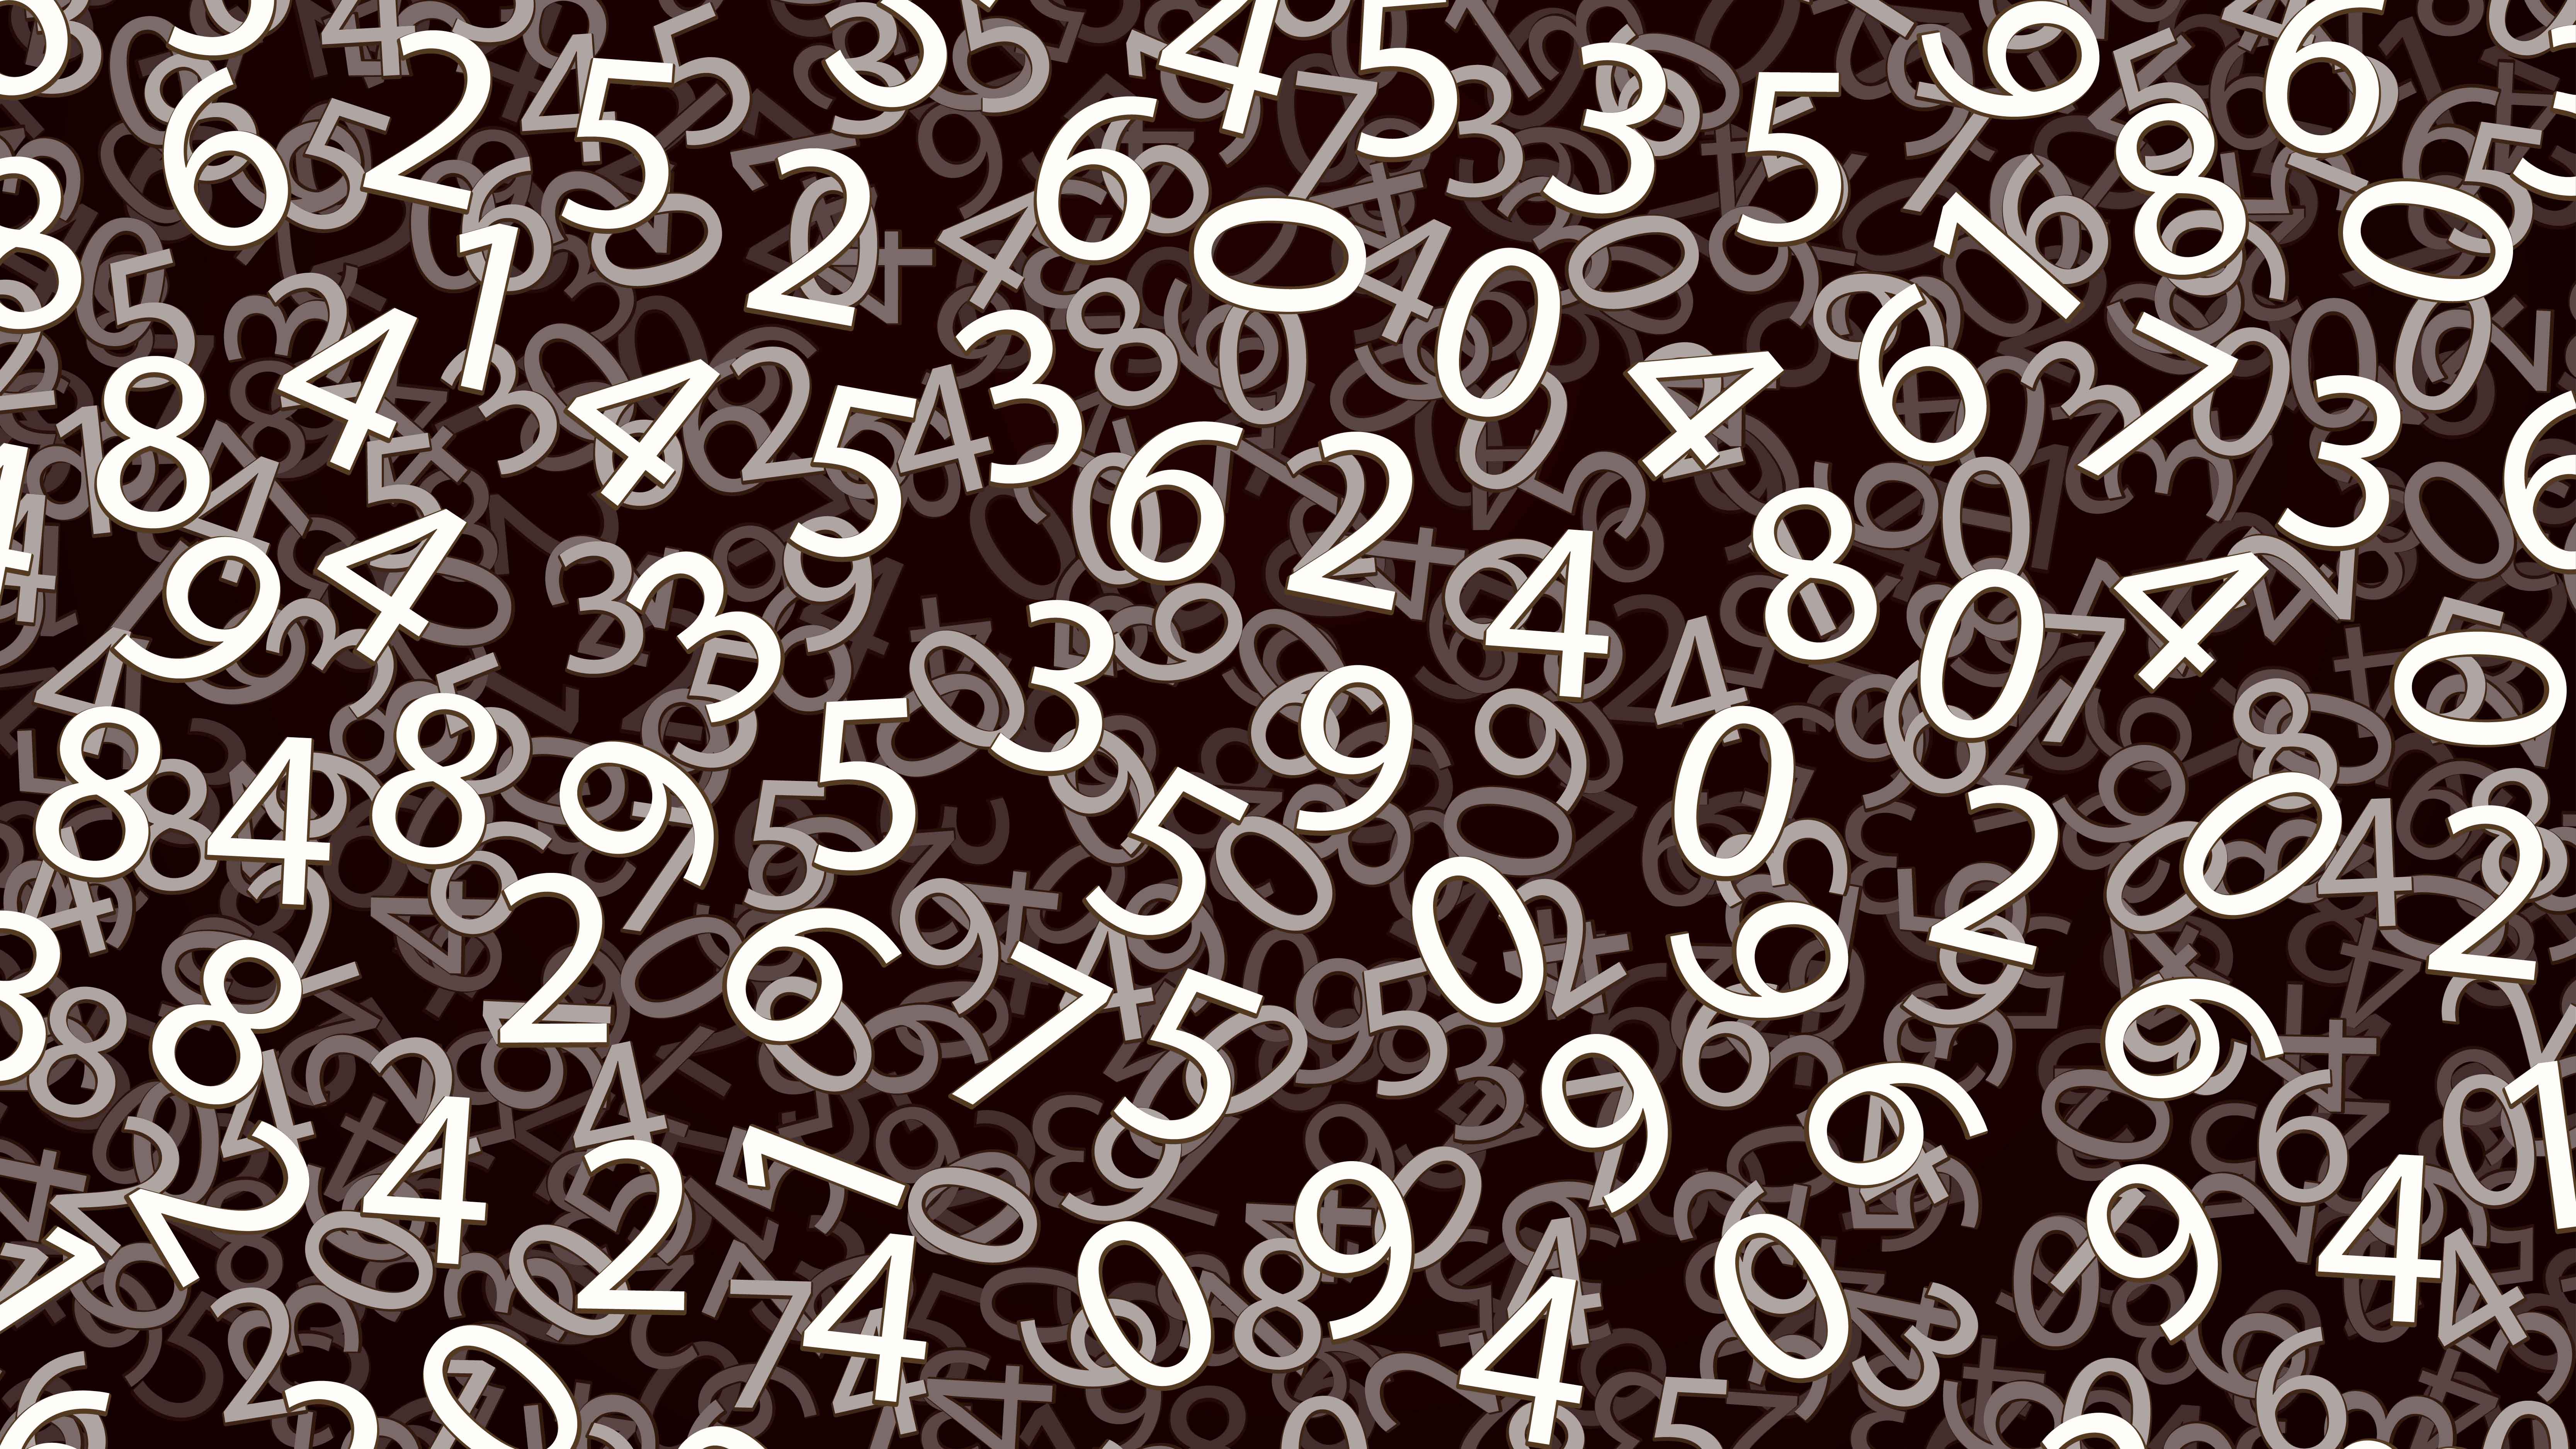 Collage of numbers